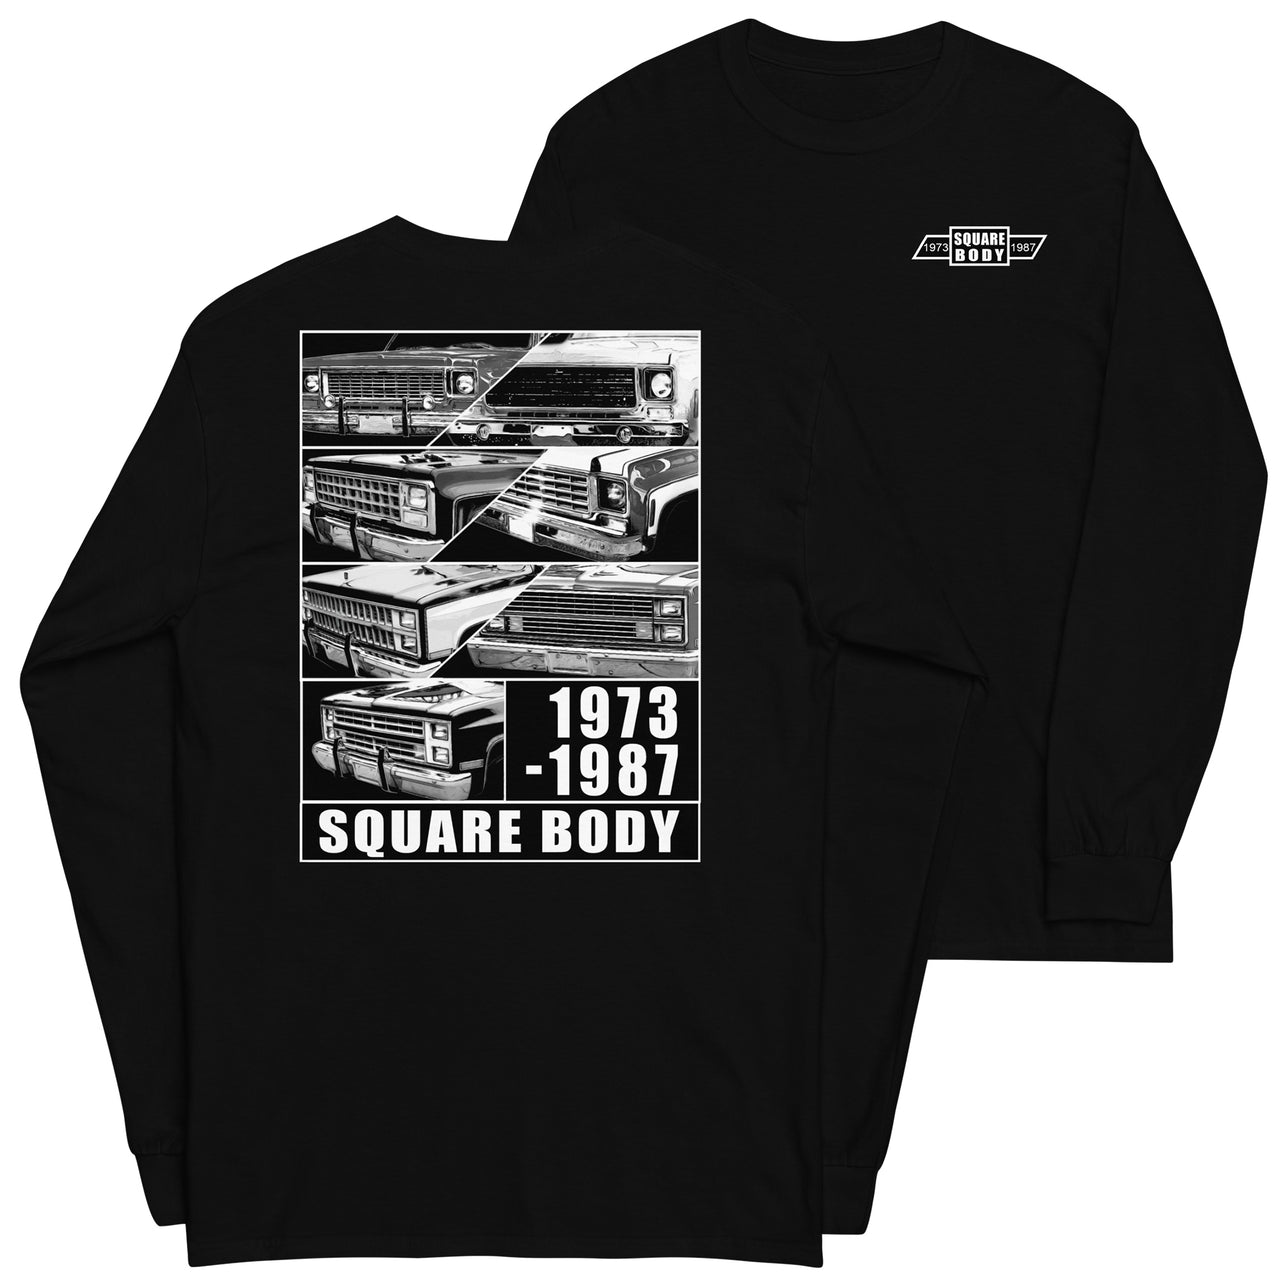 Square Body 1973-1987 Long Sleeve T-Shirt in black